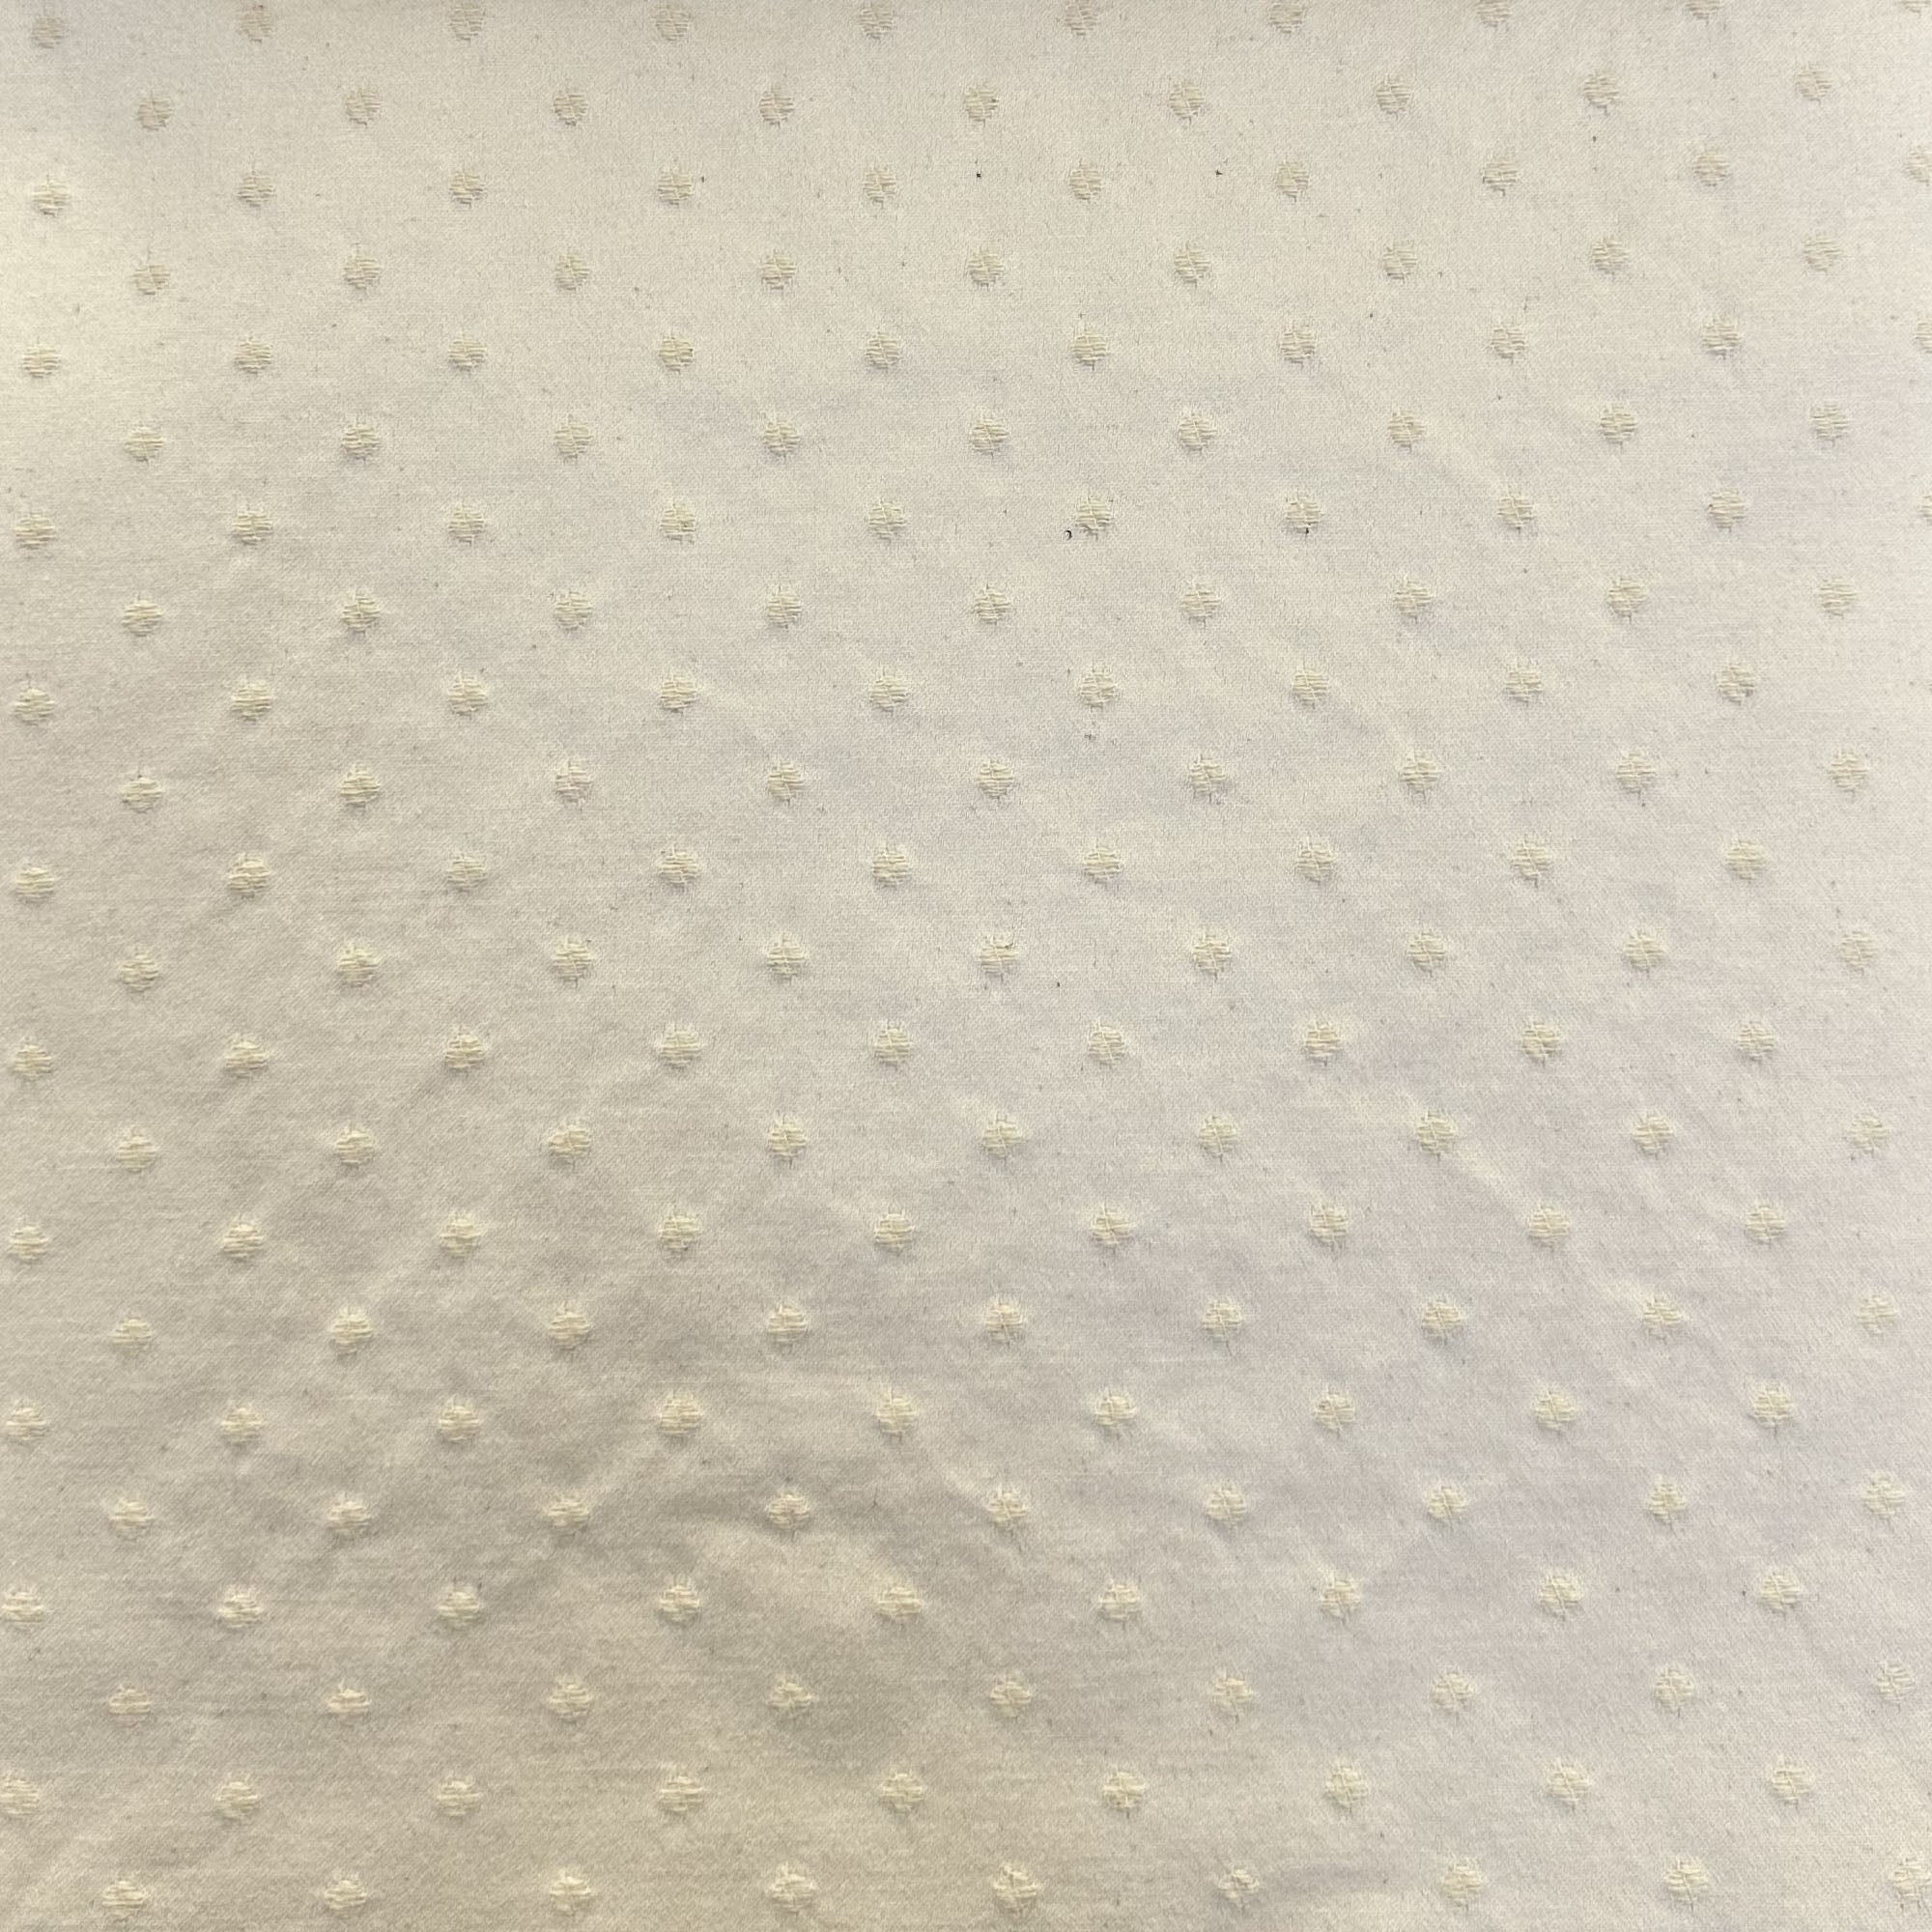 Chelsea Fabric | Embossed Dotted Jacquard Pattern